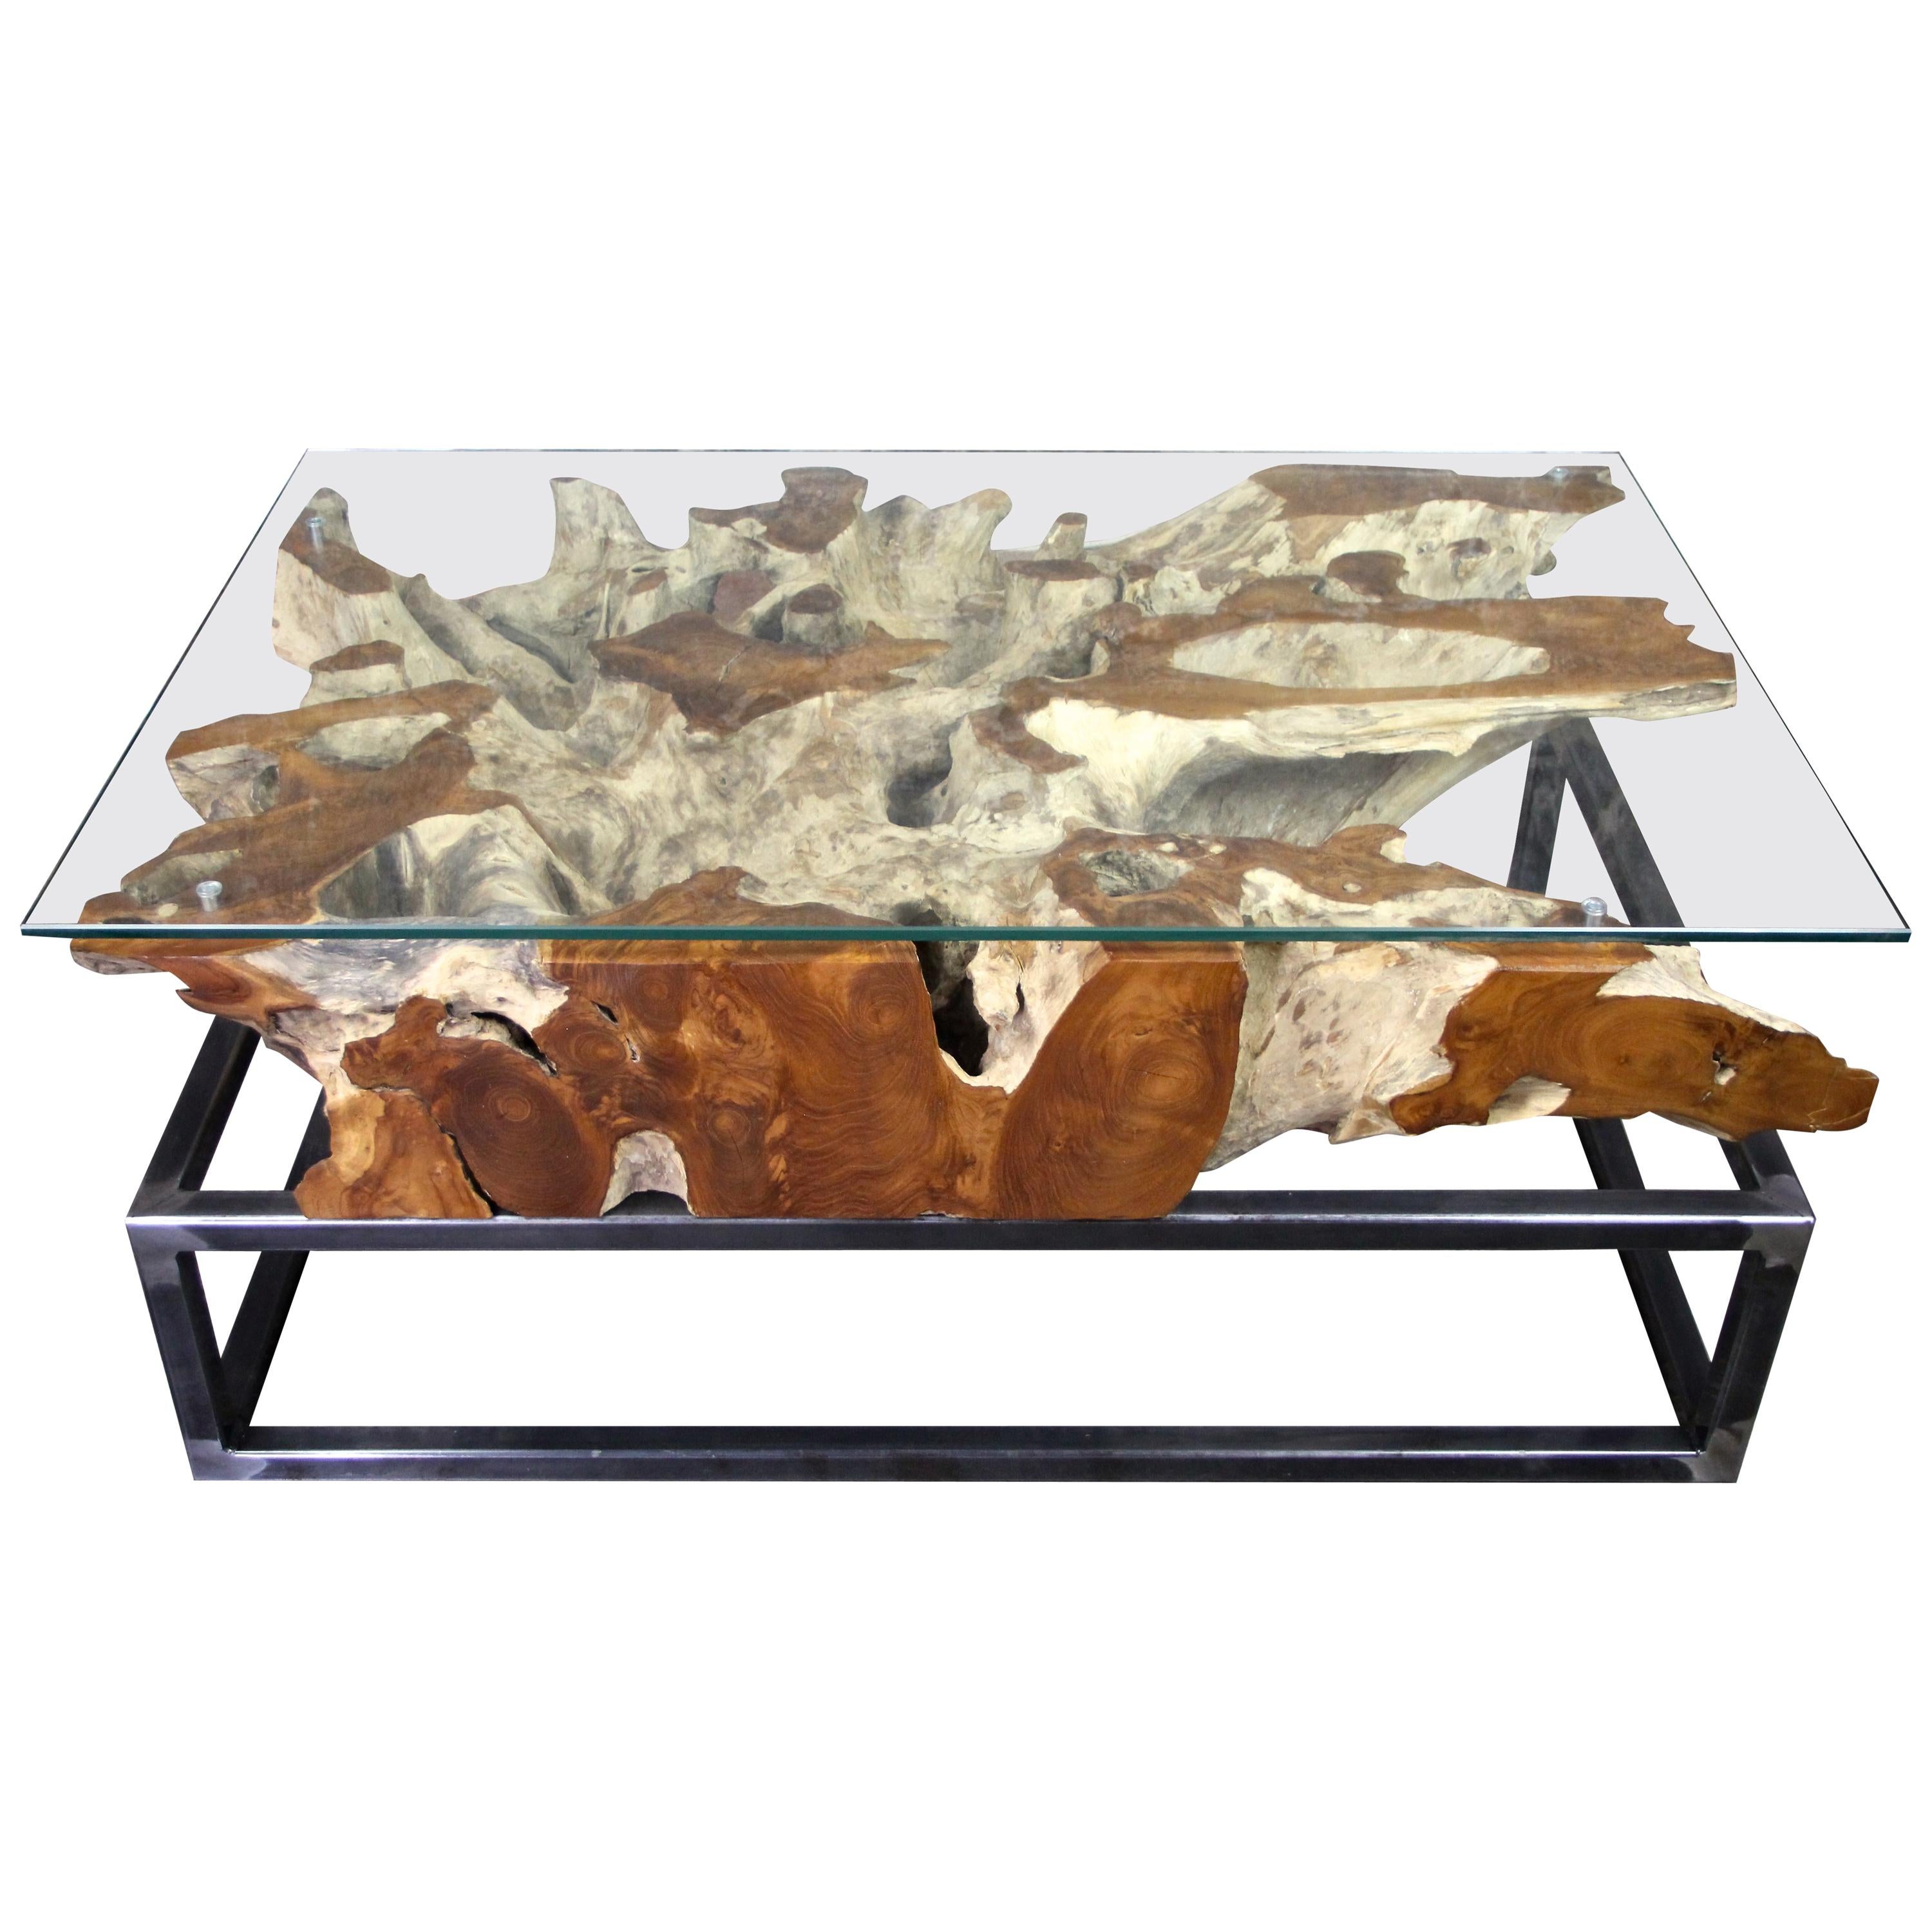 Modern Organic Teak Root Coffee Table on Industrial Steel Base with Glass Plate